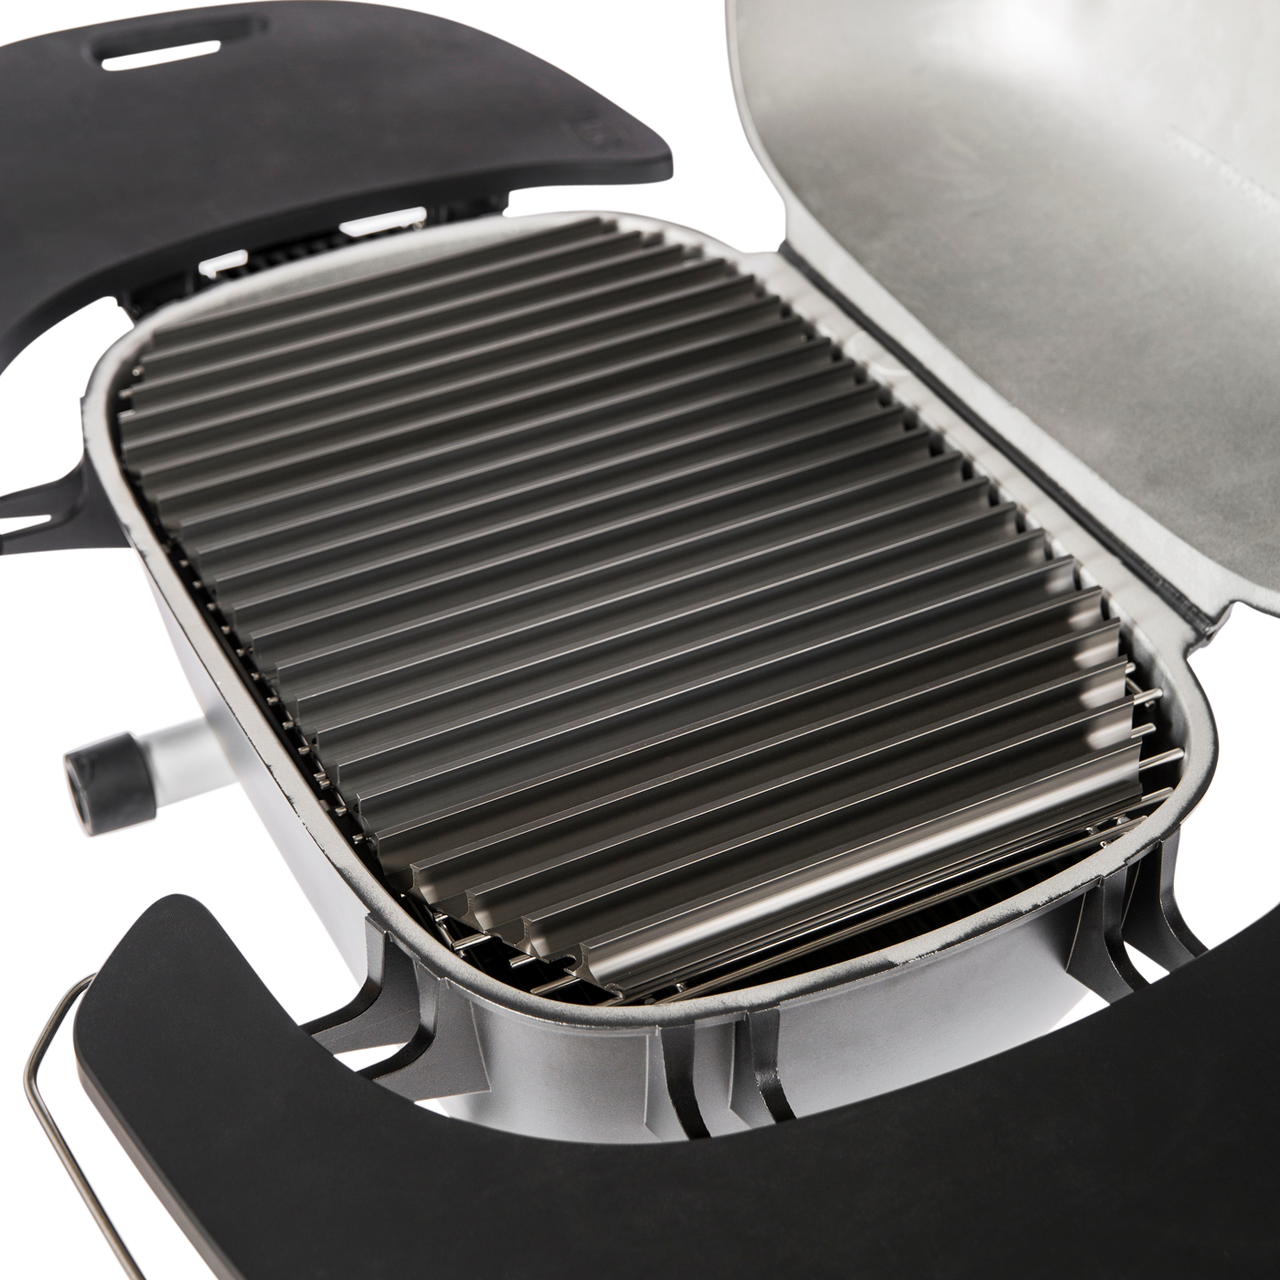 Pk360 Grill And Smoker Liveoutbound